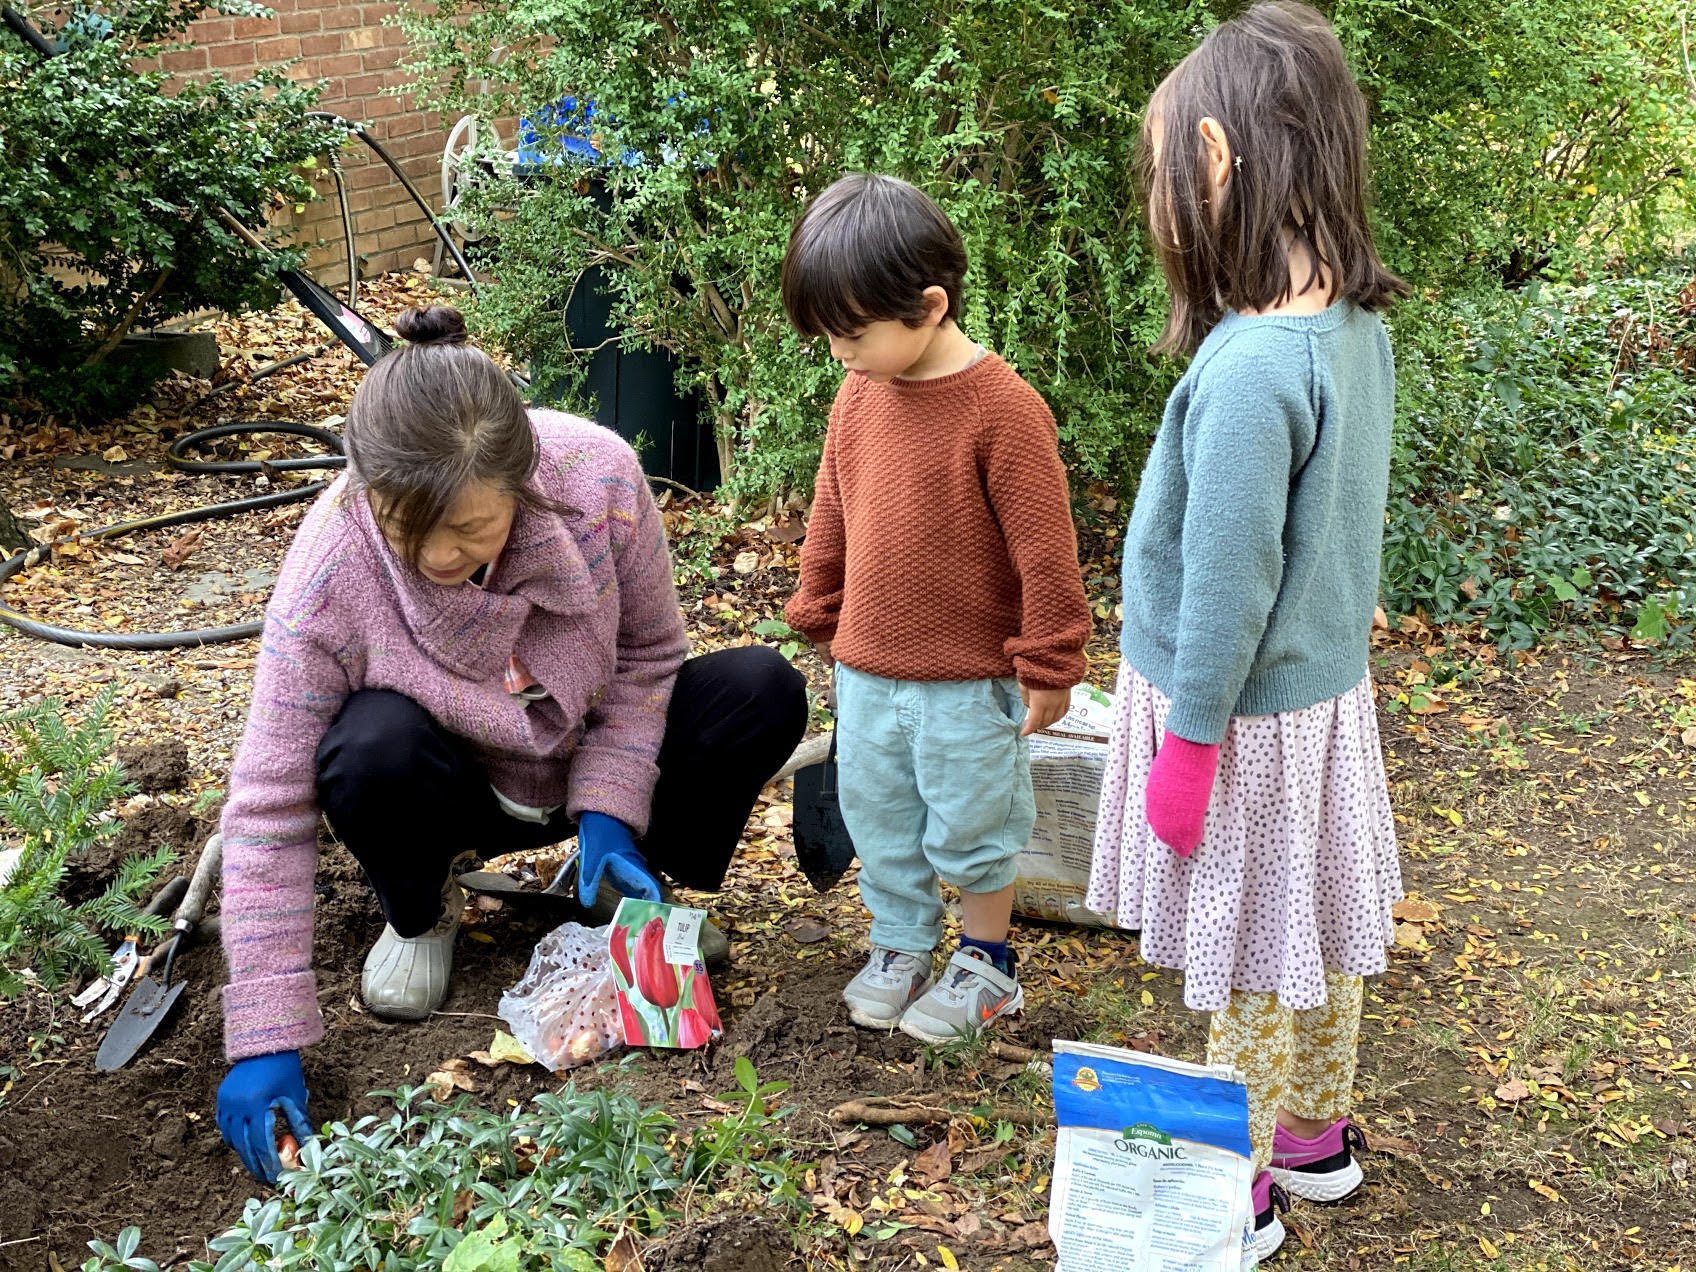 tow kids gardening with their grandmother